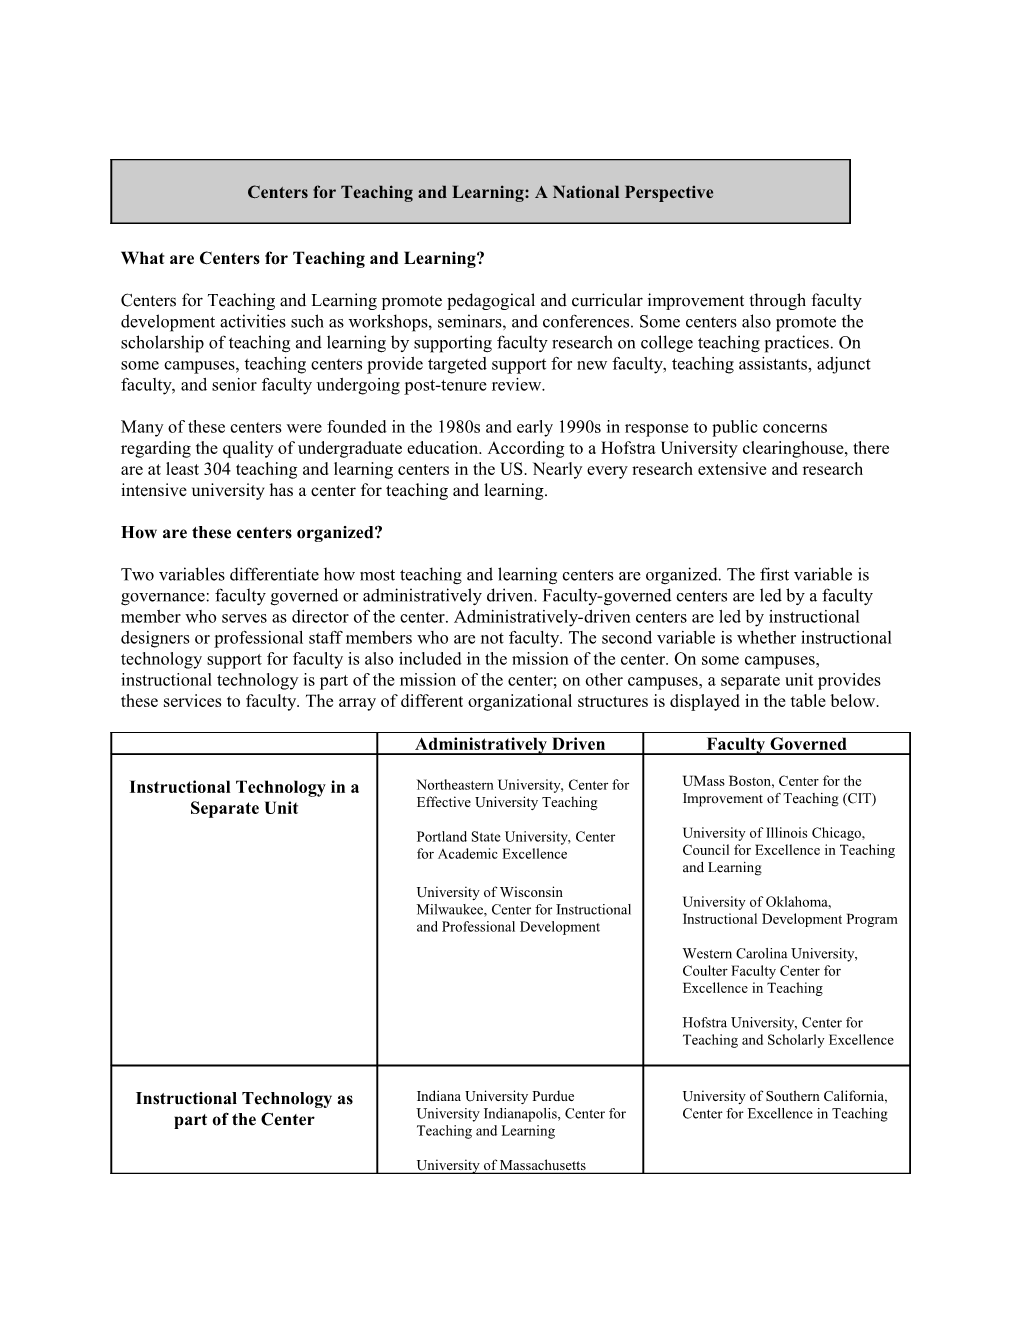 Centers for Teaching and Learning: a National Perspective